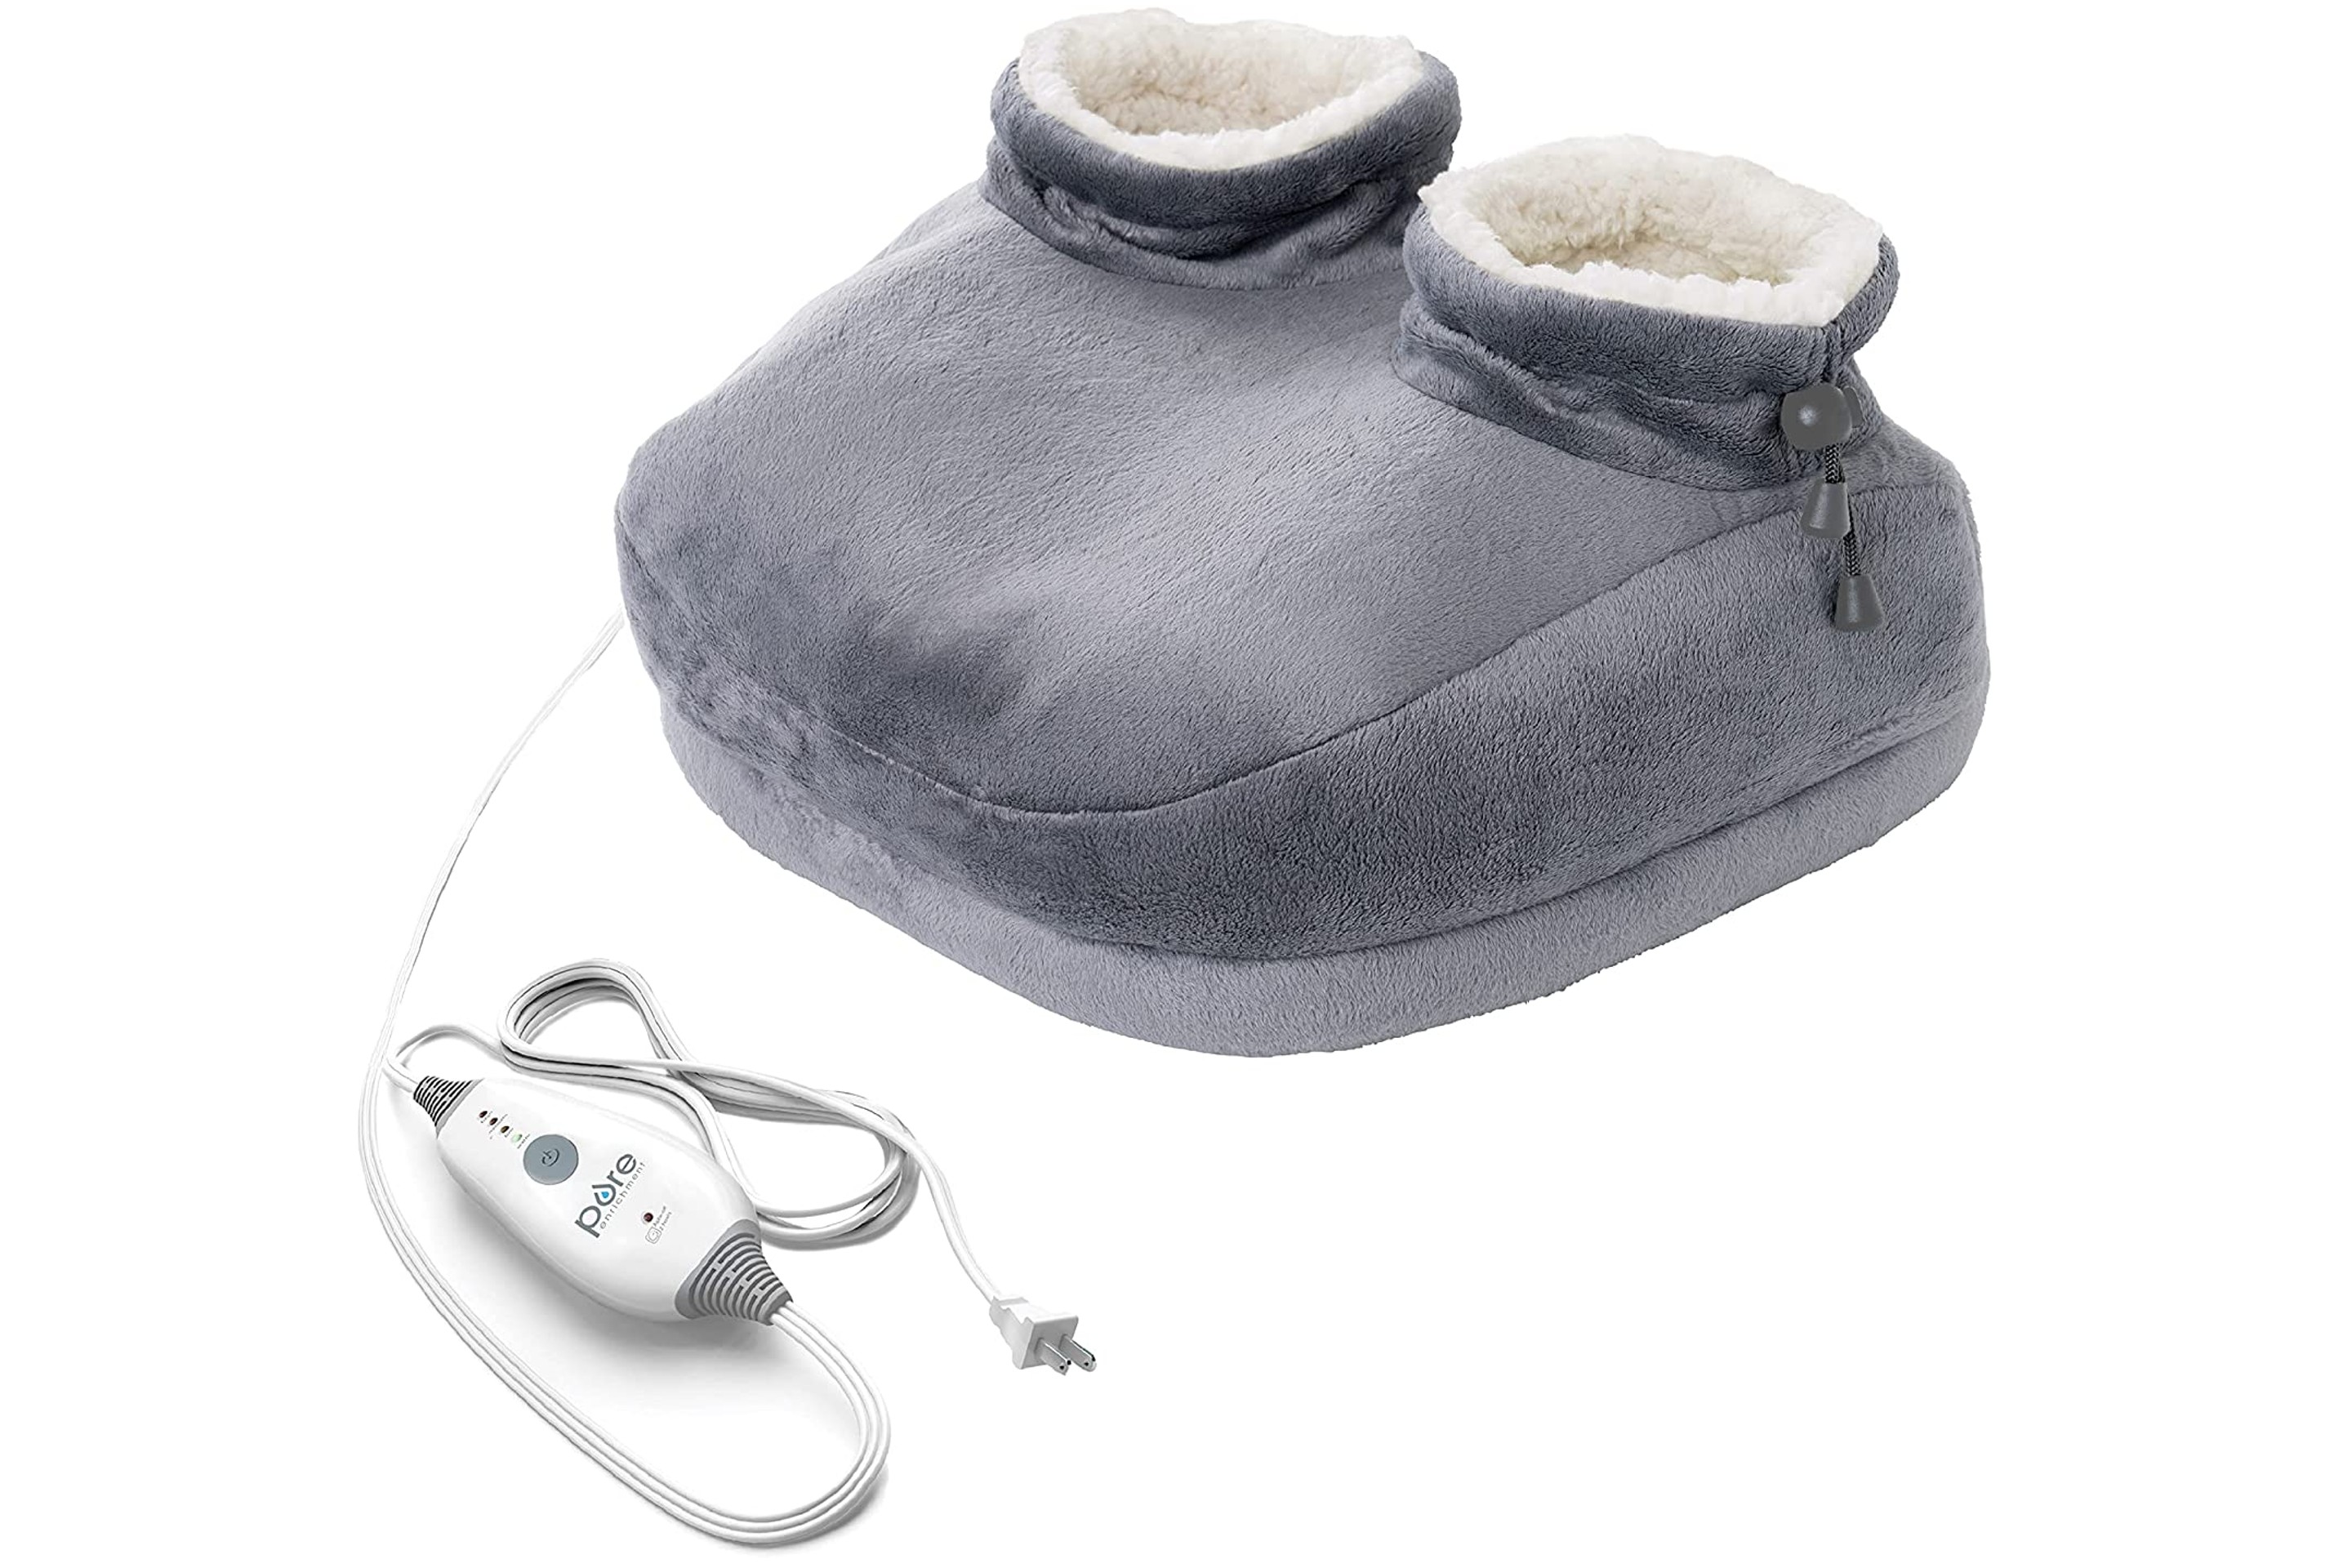 Fast-Heating Sherpa-Lined Deluxe Foot Warmer